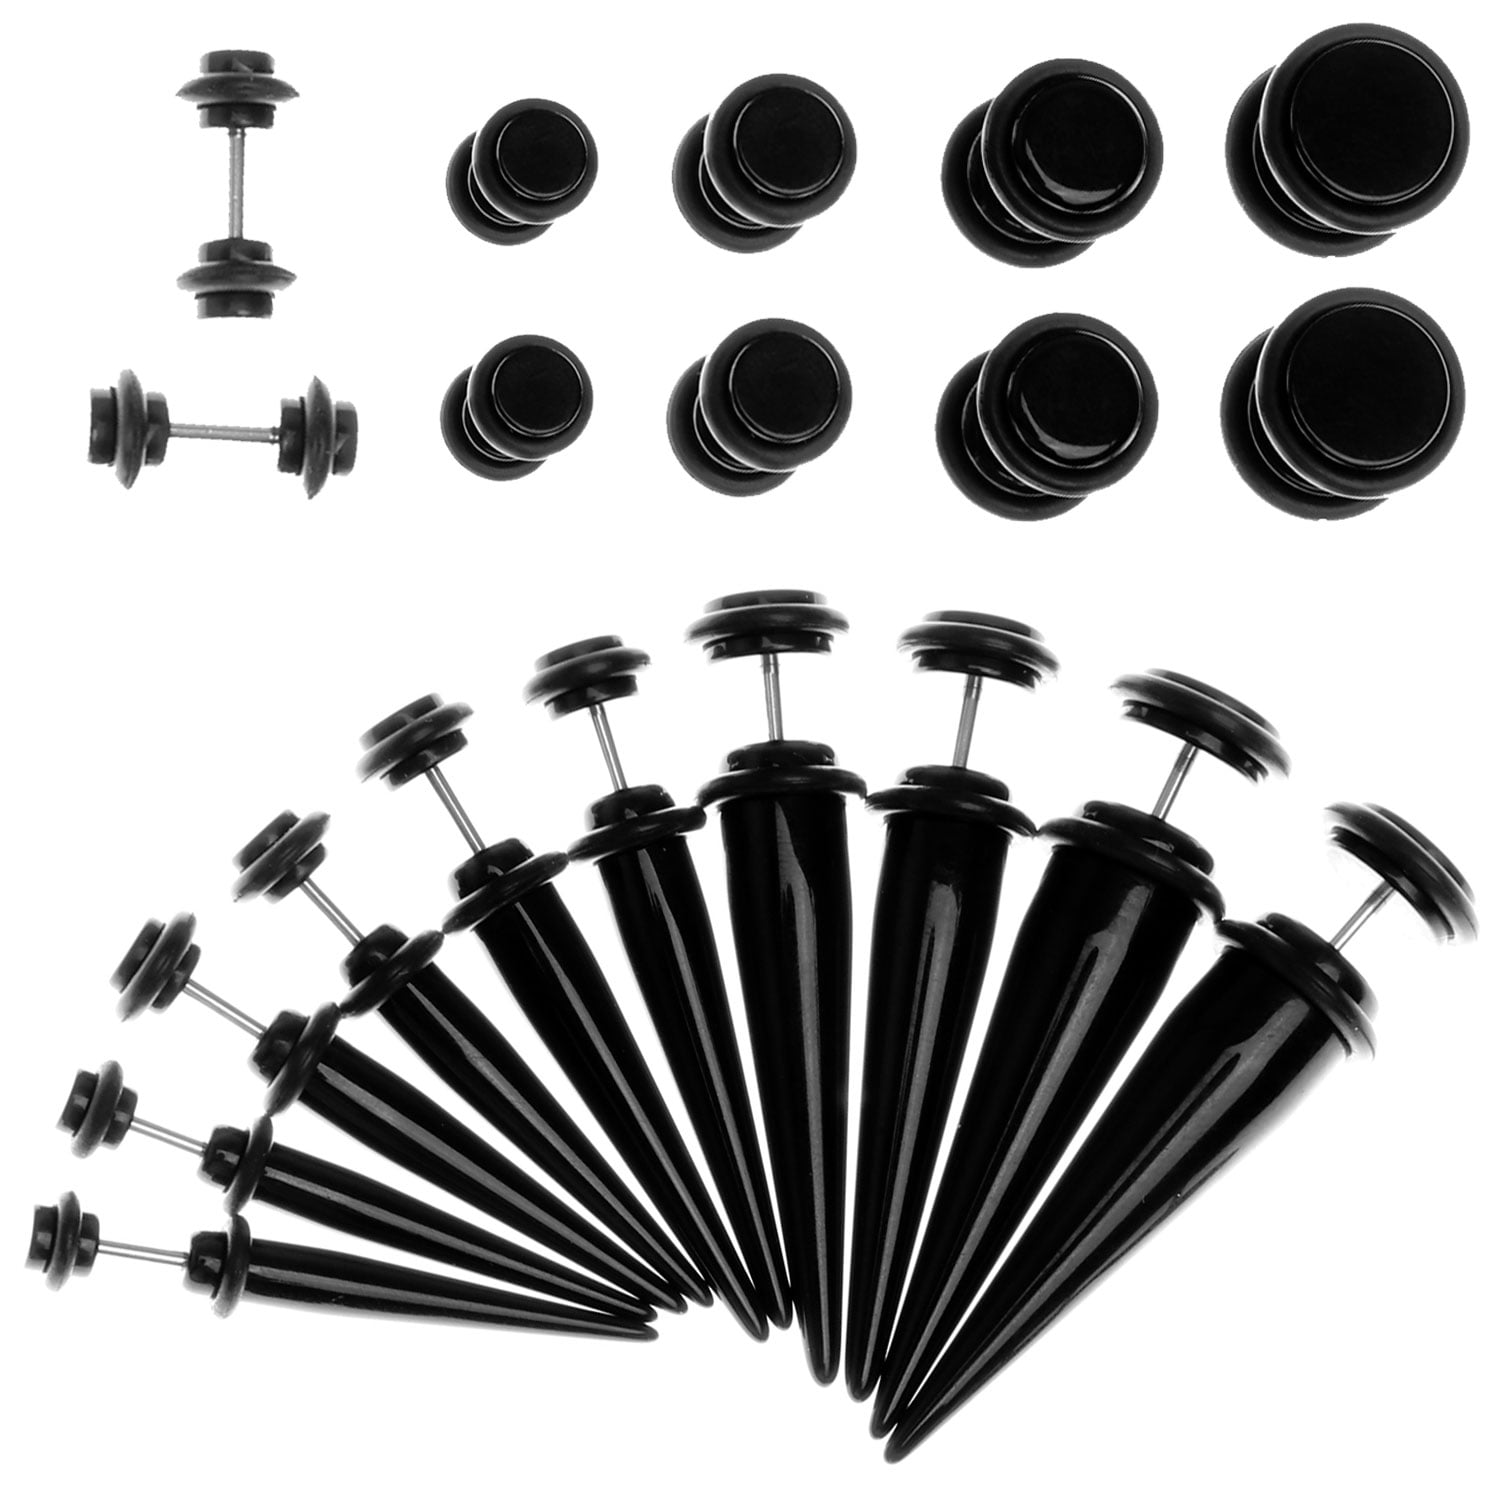 BodyJ4You Fake Taper Kit 20 Pieces Black Fake Tapers and Plugs 2G-00G Fake  Stretching Kit Look 4mm-10mm - 10 Pairs